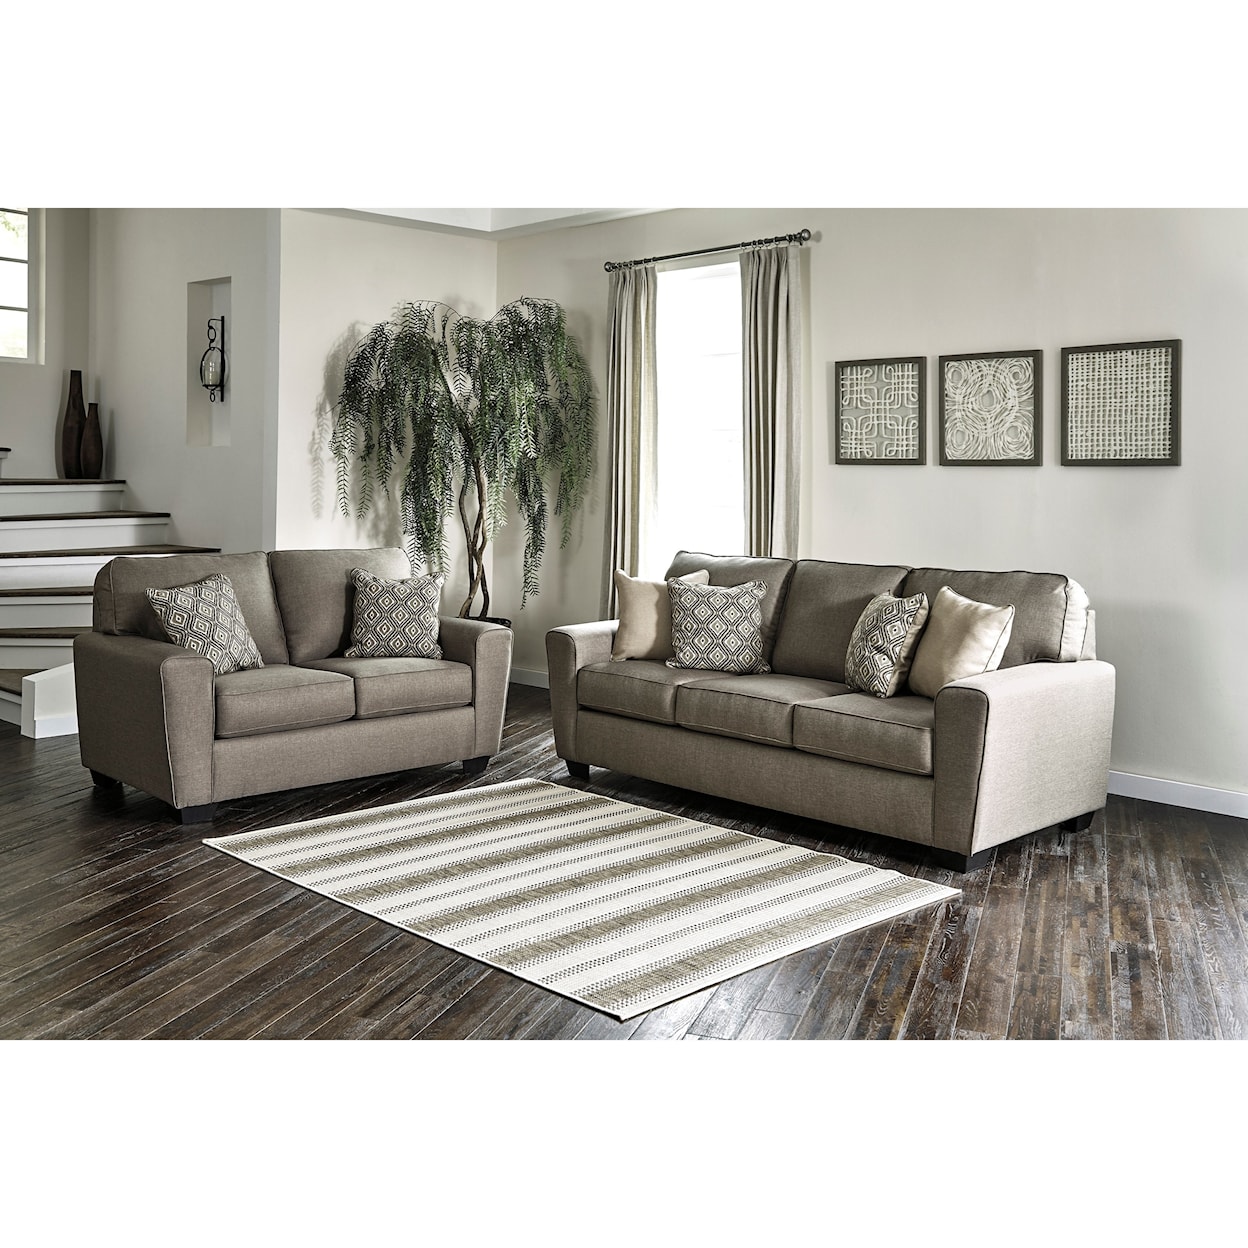 Benchcraft Calicho Stationary Living Room Group